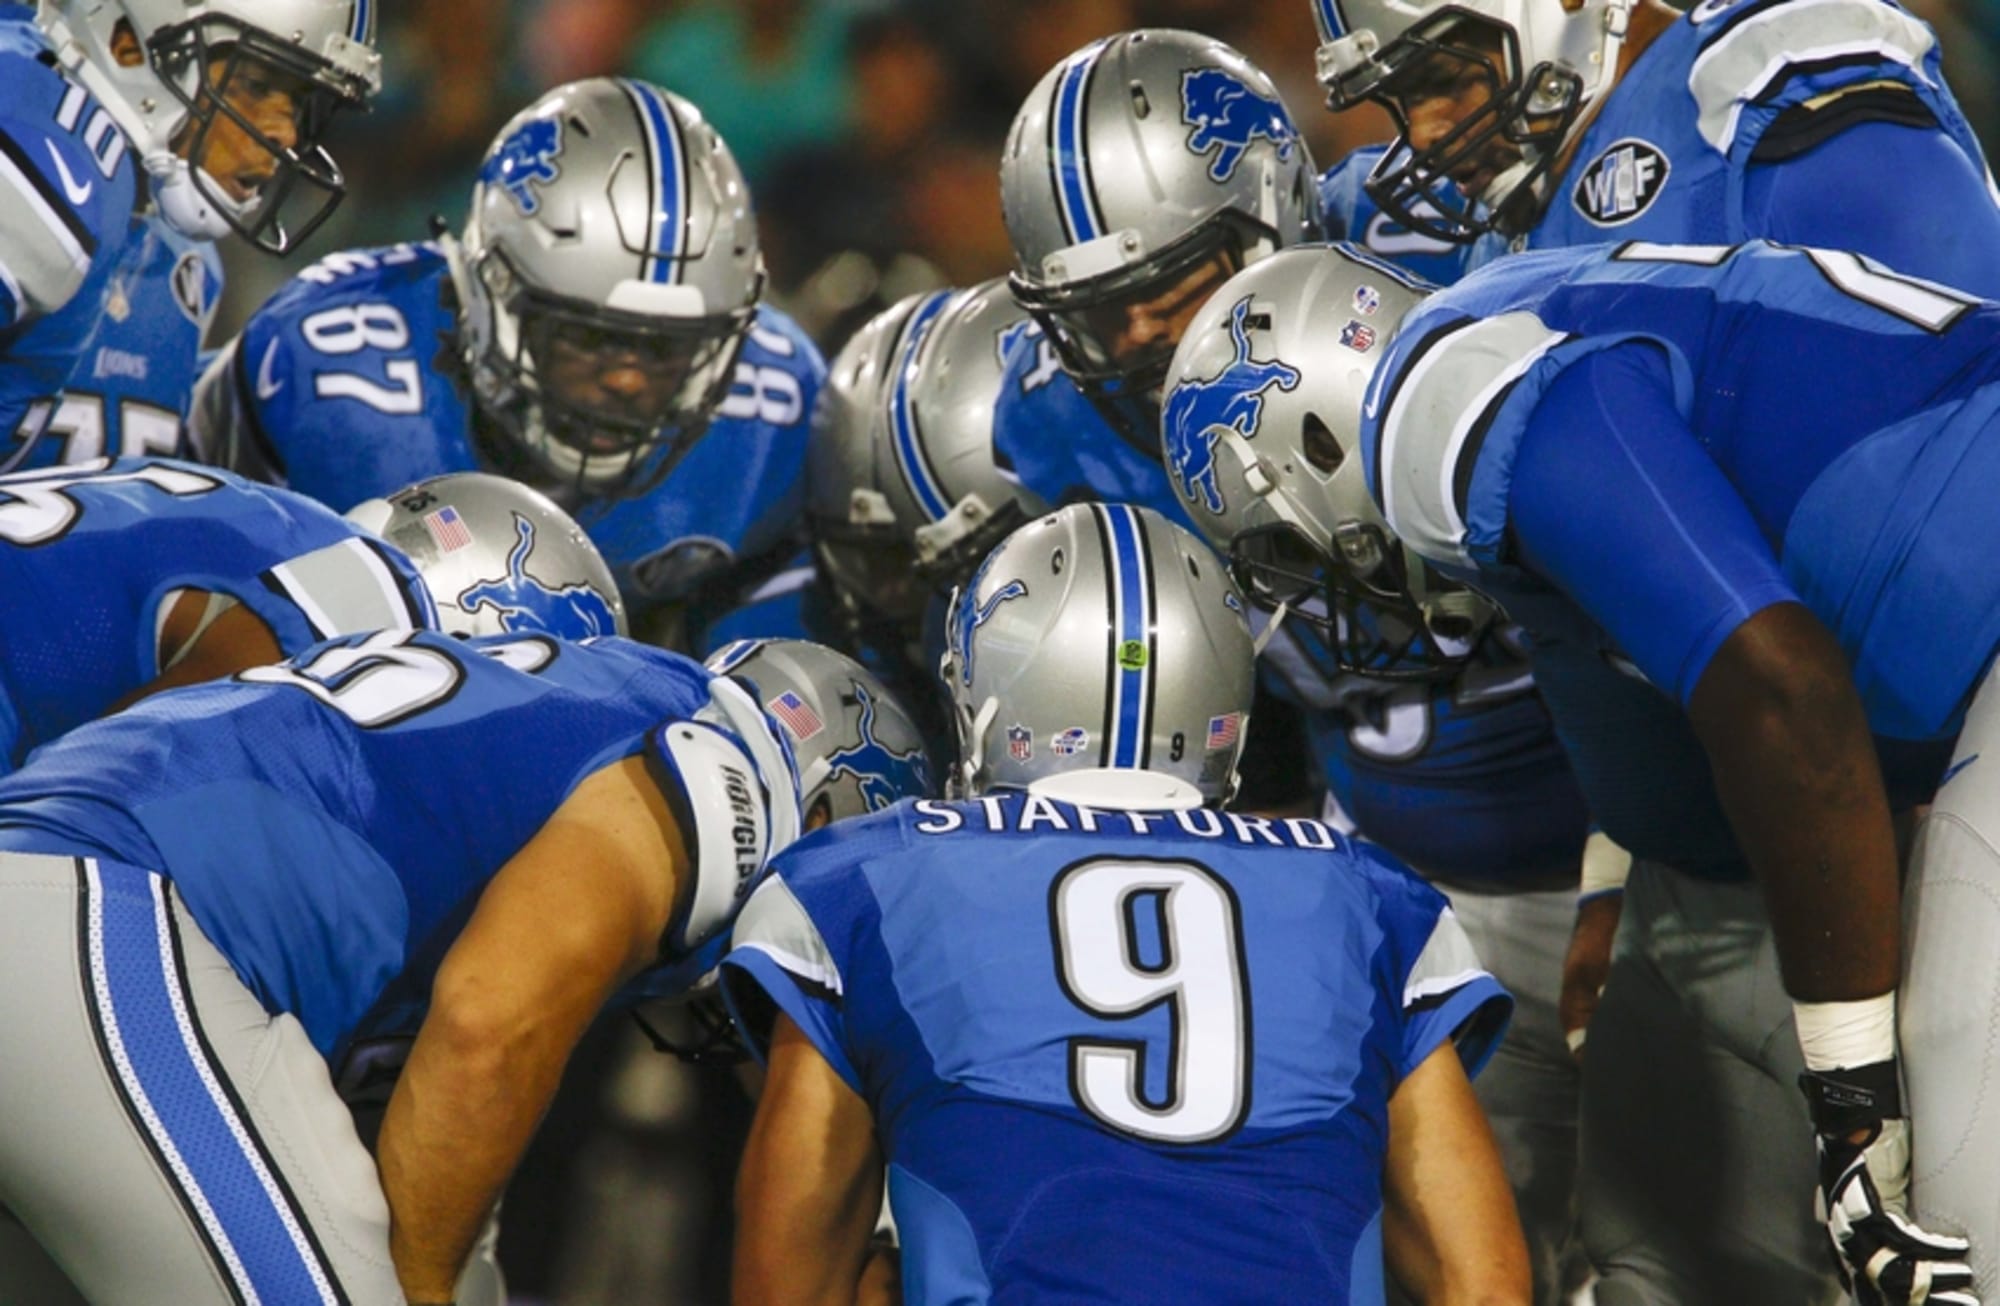 Detroit Lions will debut Color Rush jerseys this fall